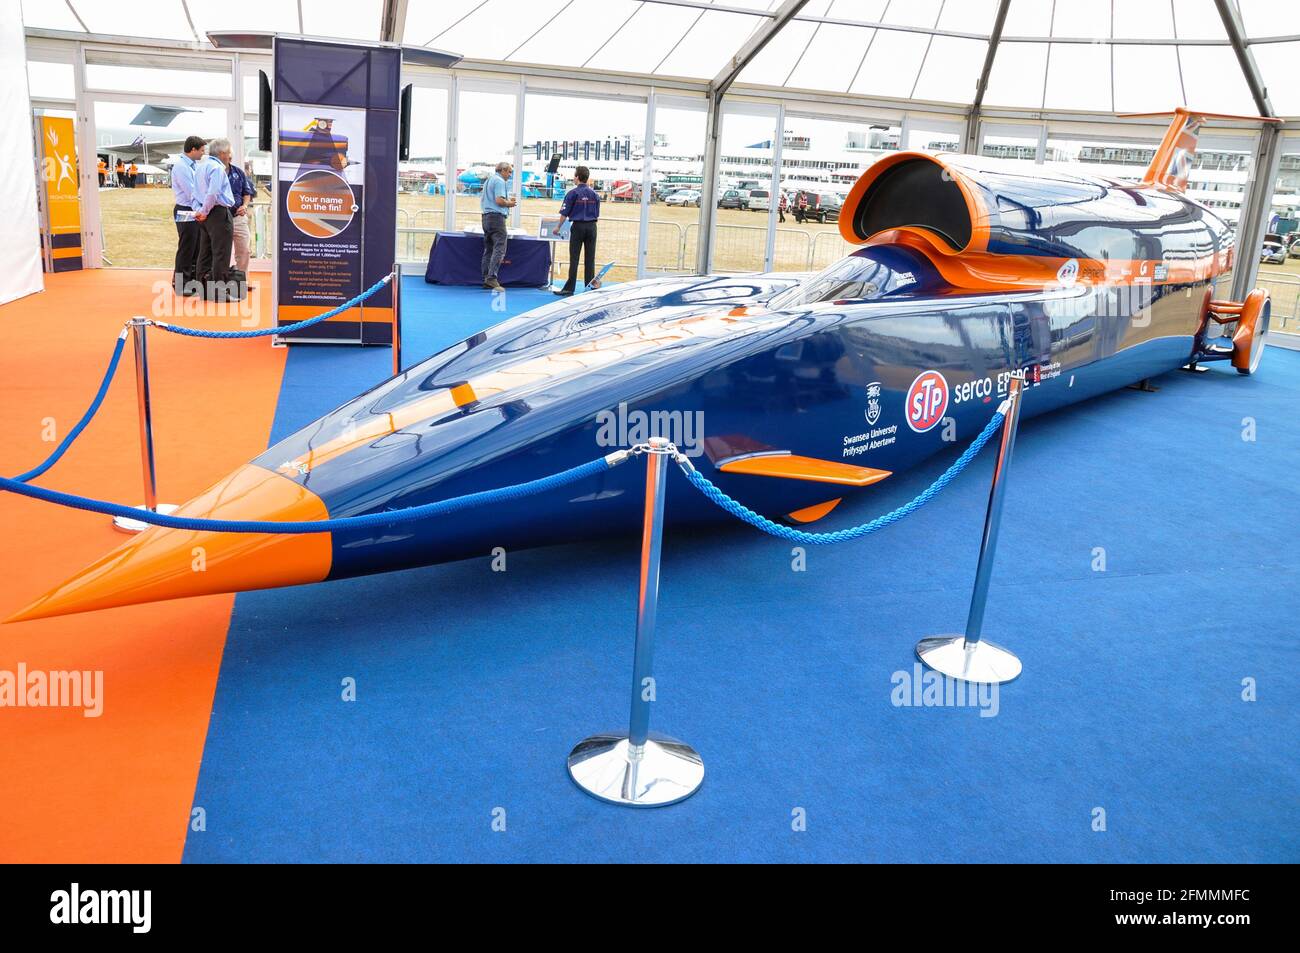 Bloodhound SSC at the Farnborough International Airshow 2010. Promoting the Supersonic car record attempt to industry and public Stock Photo